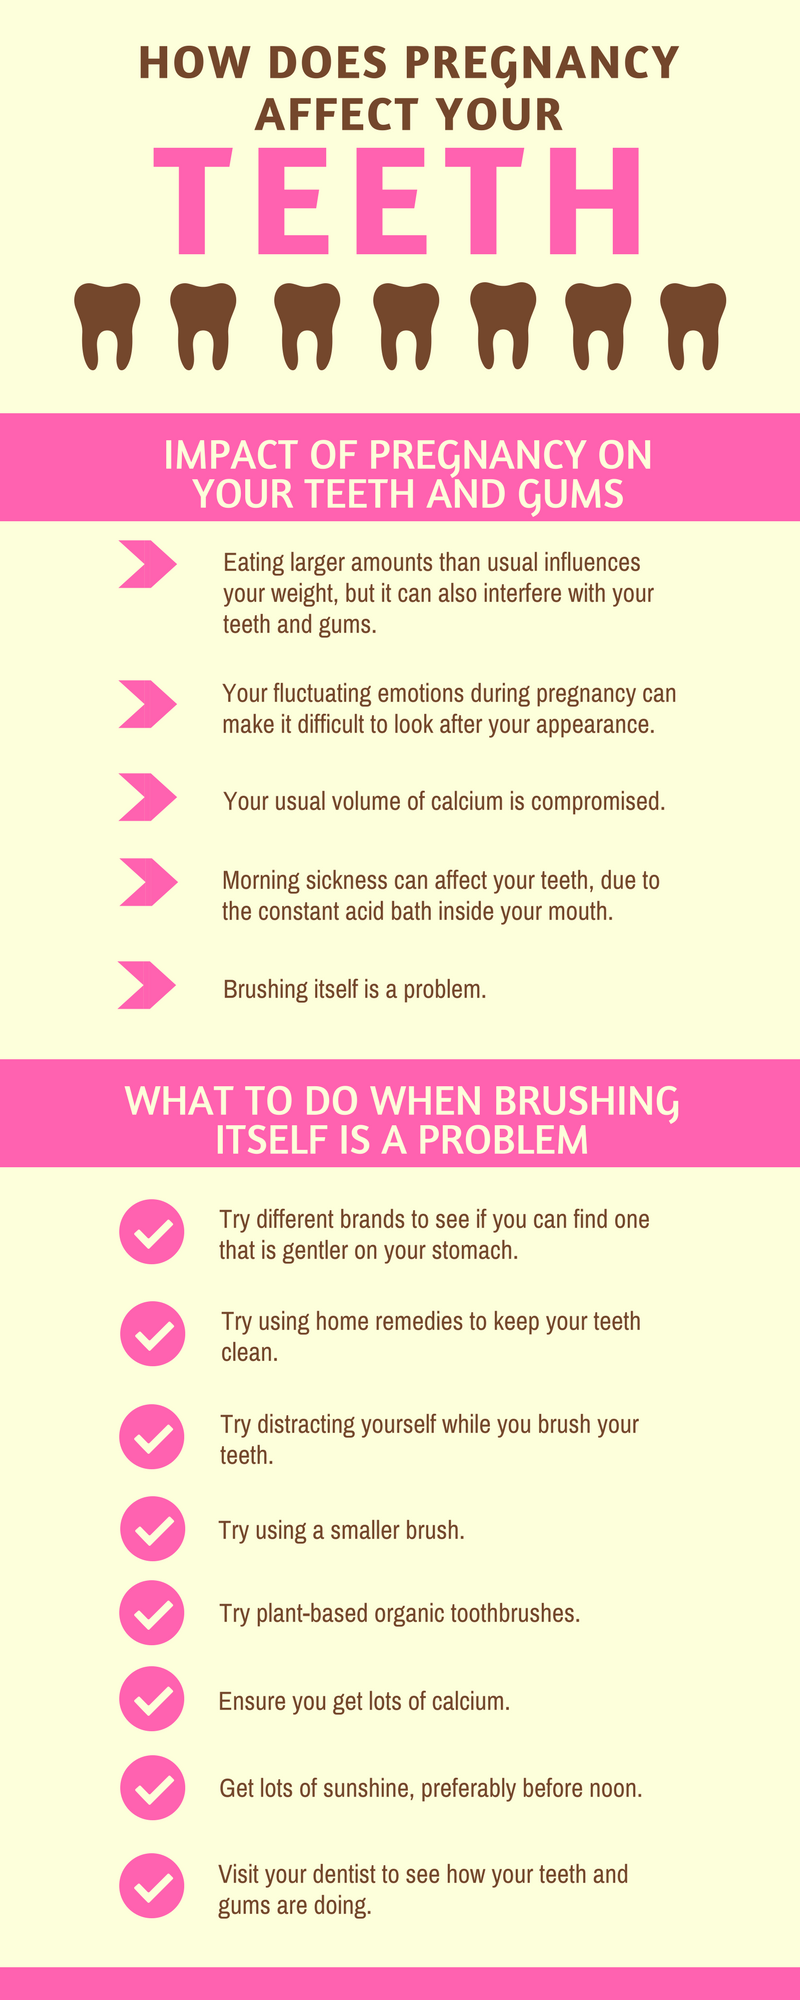 How does pregnancy affect your teeth